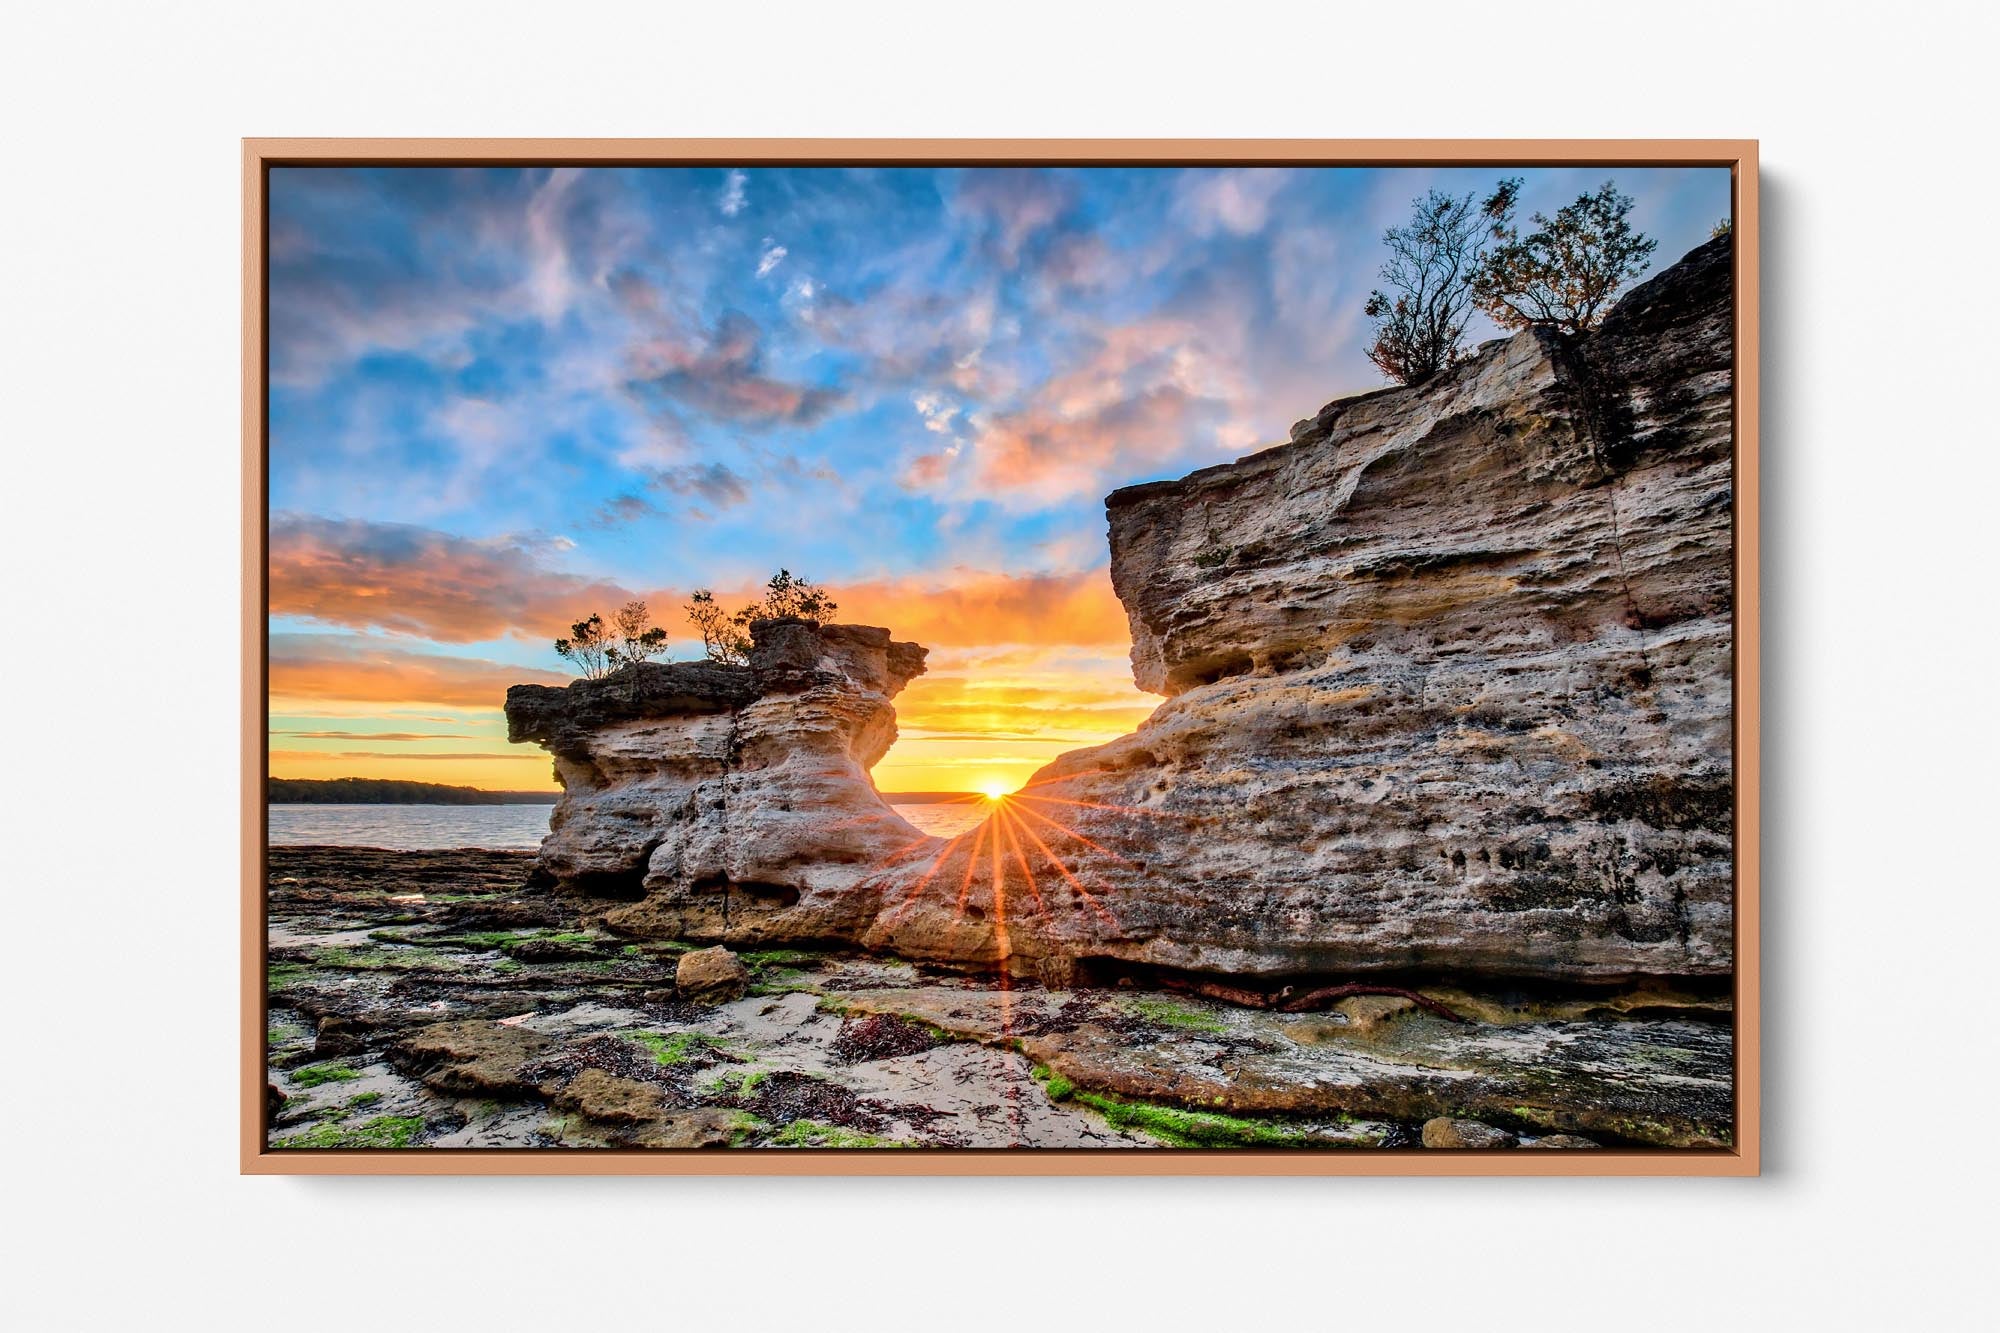 Hole In The Wall Beach Sunset | Jervis Bay